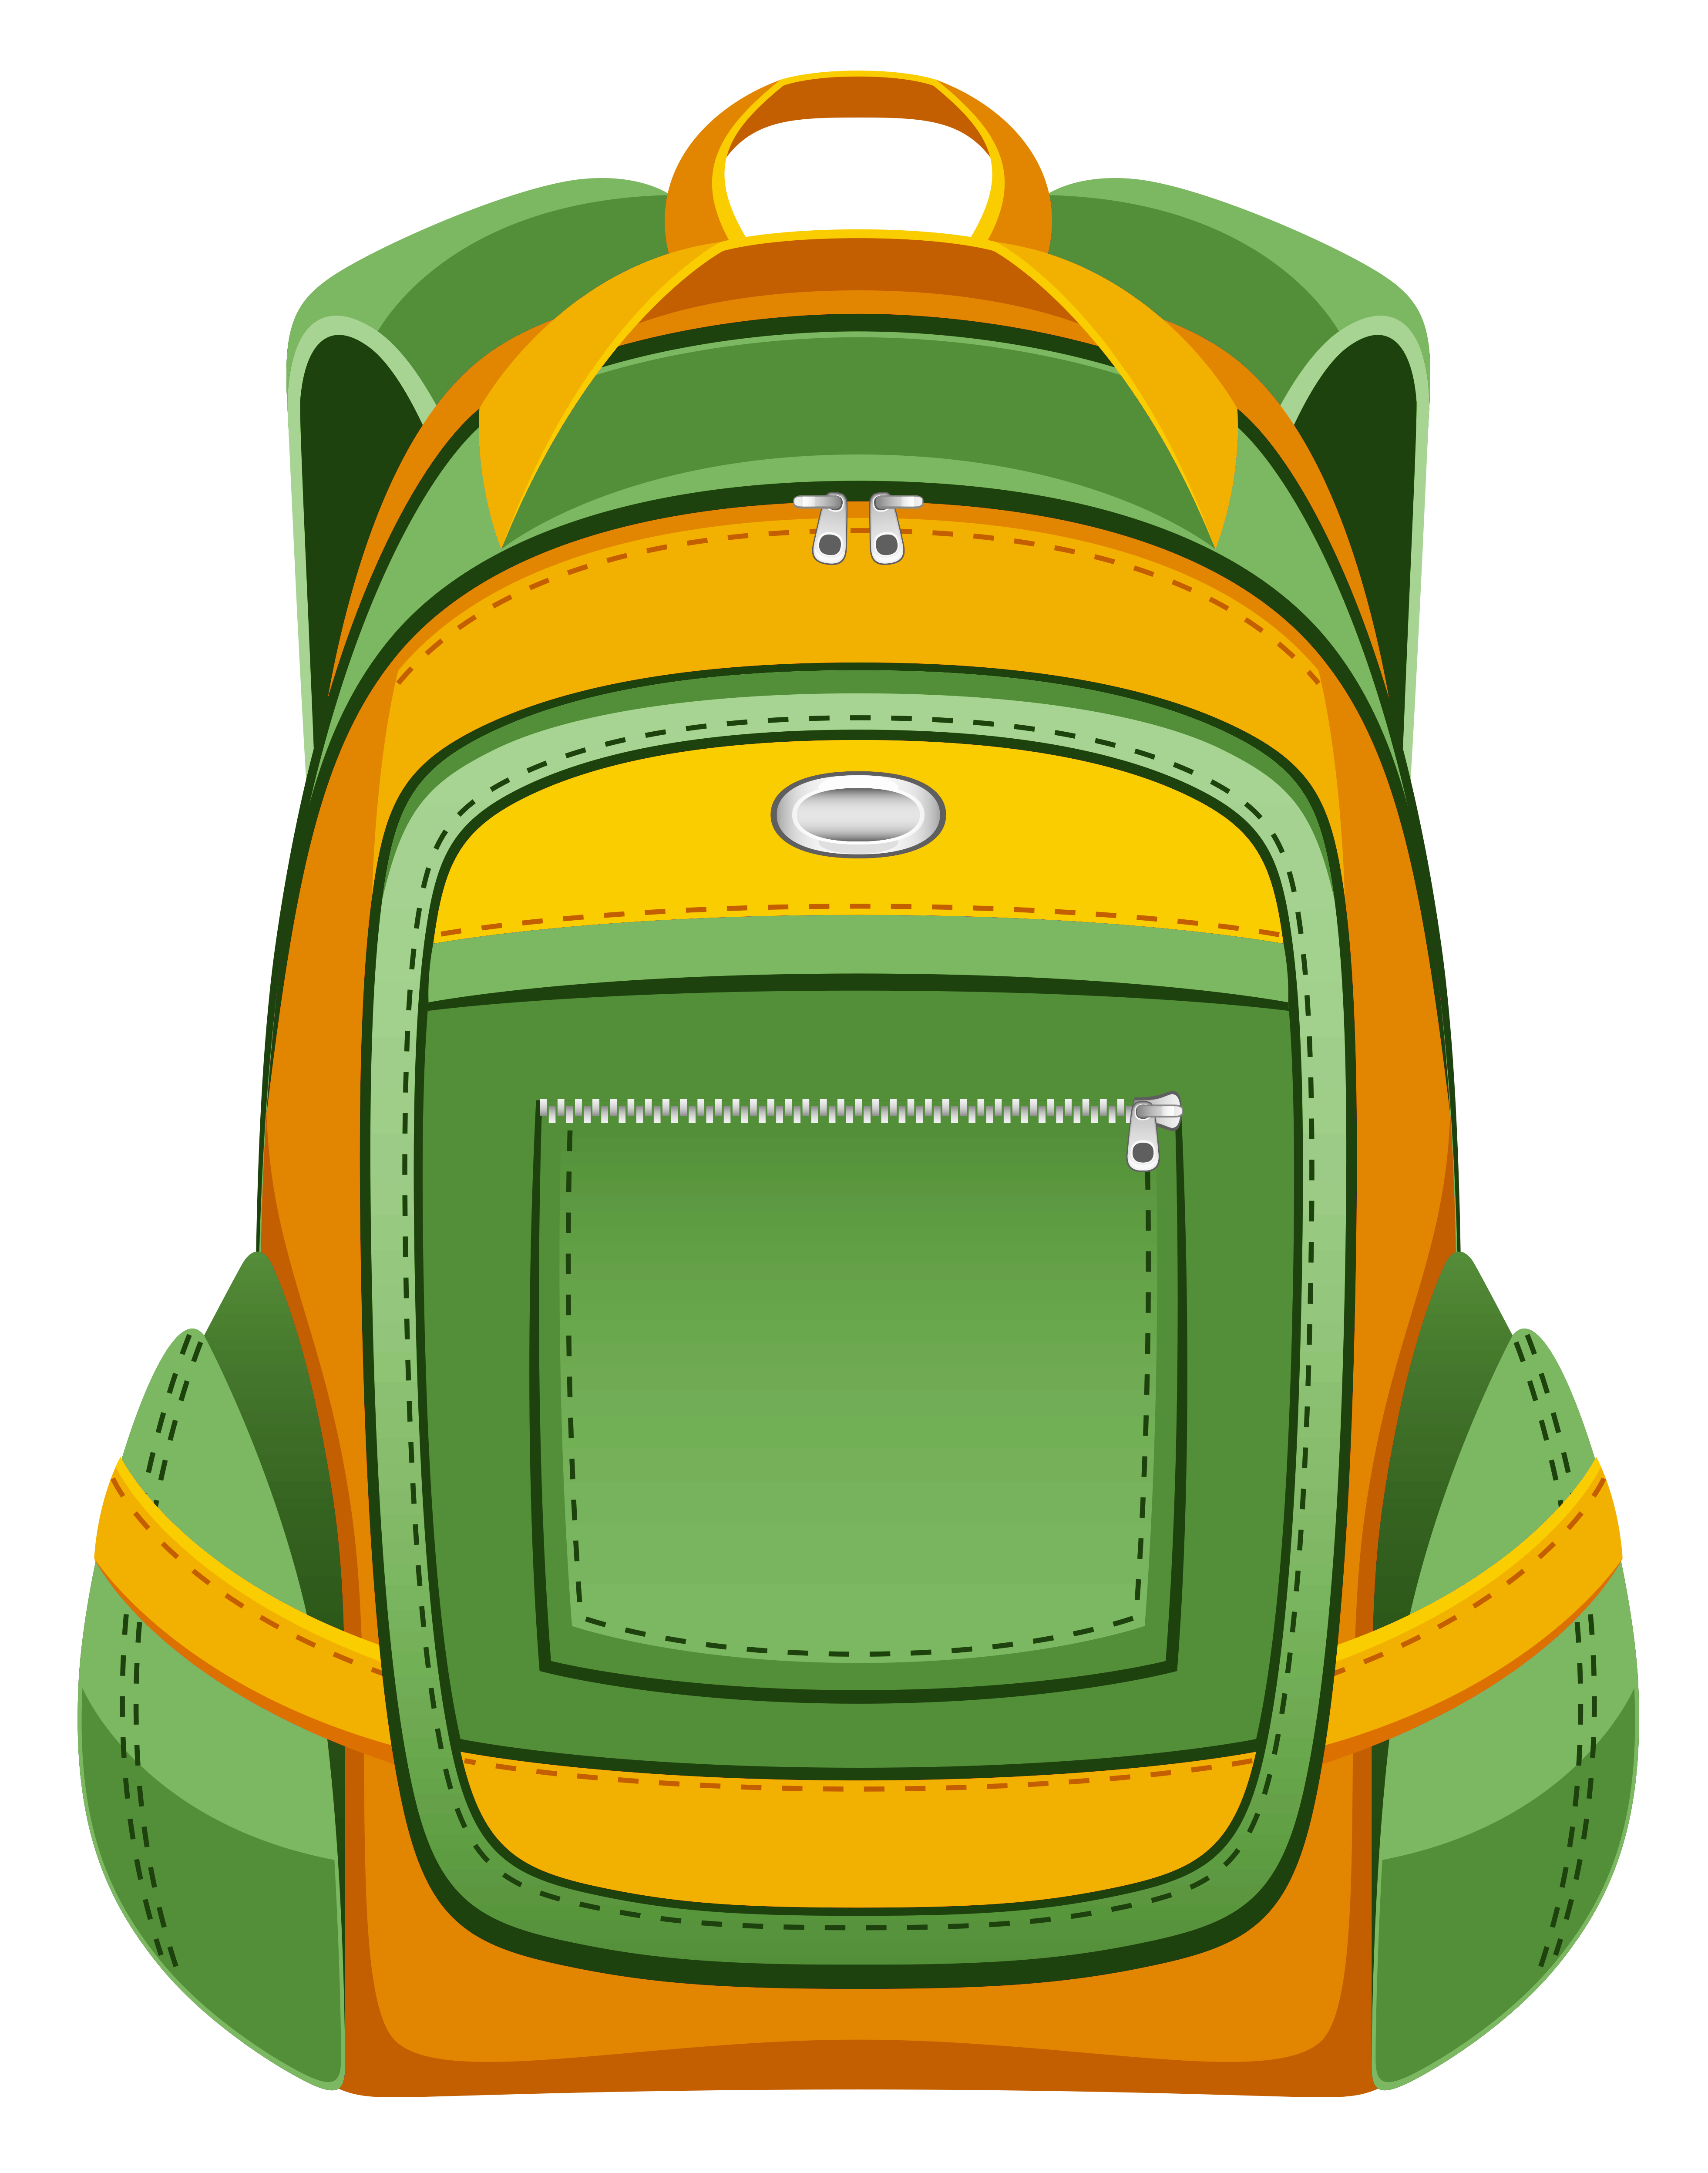 Backpack Cliparts | Back to School Bag Clip Arts | Colorful Backpacks Clip  Arts